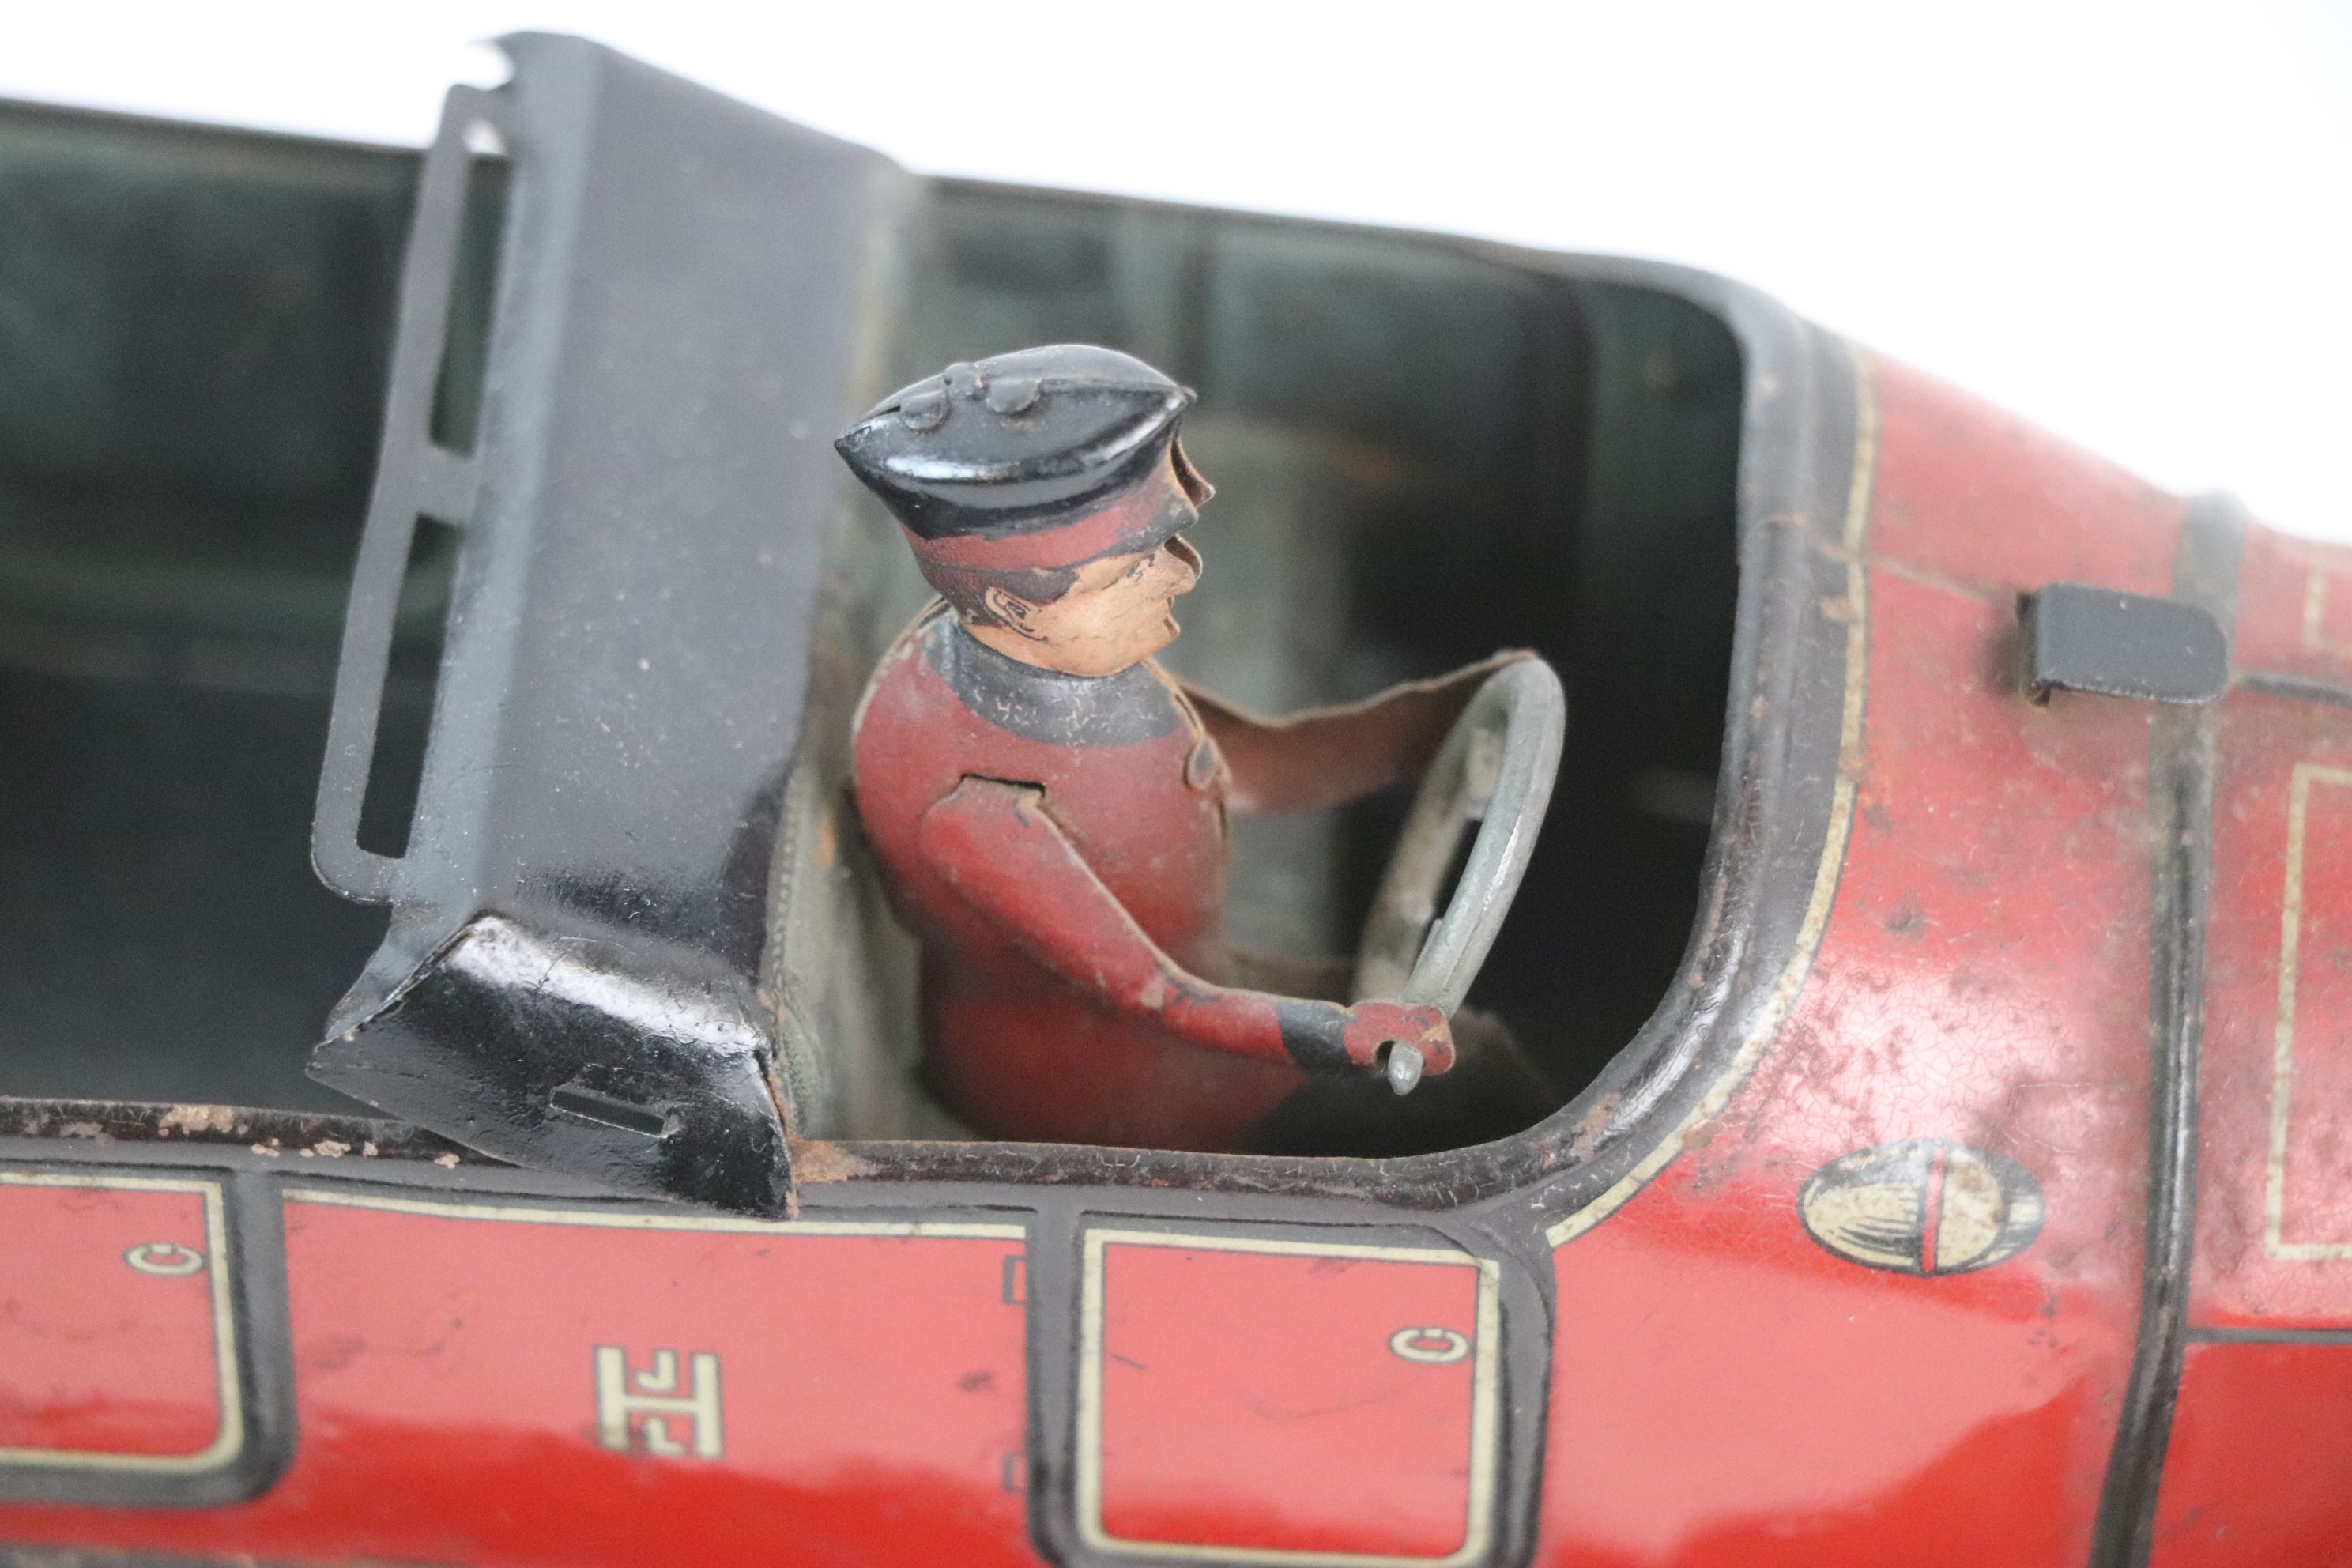 Early-mid 20th C HJL tin plate car with driver, in red with black, gd overall condition - Image 3 of 5